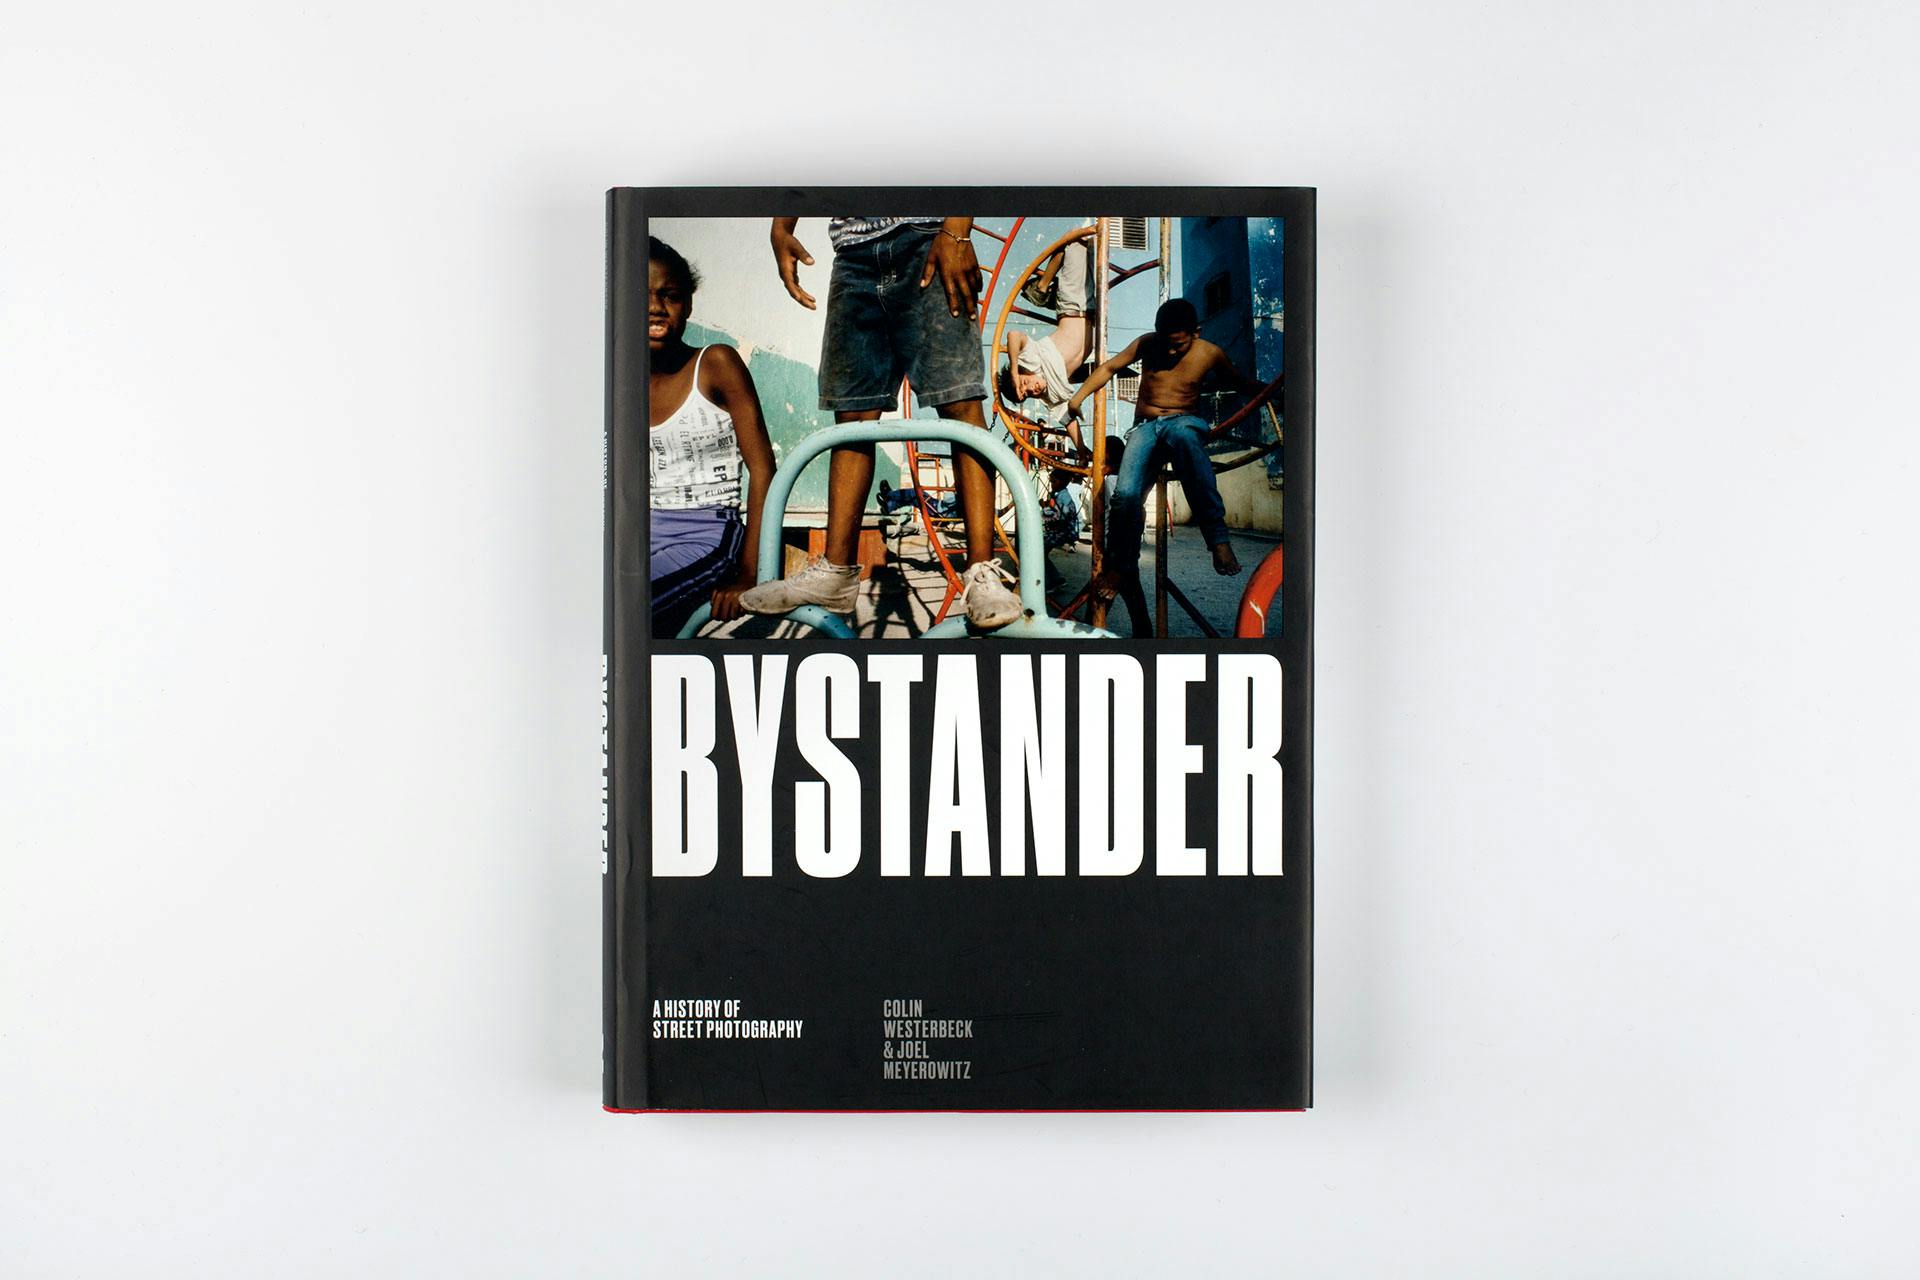 Bystander: the history of street photography revisited